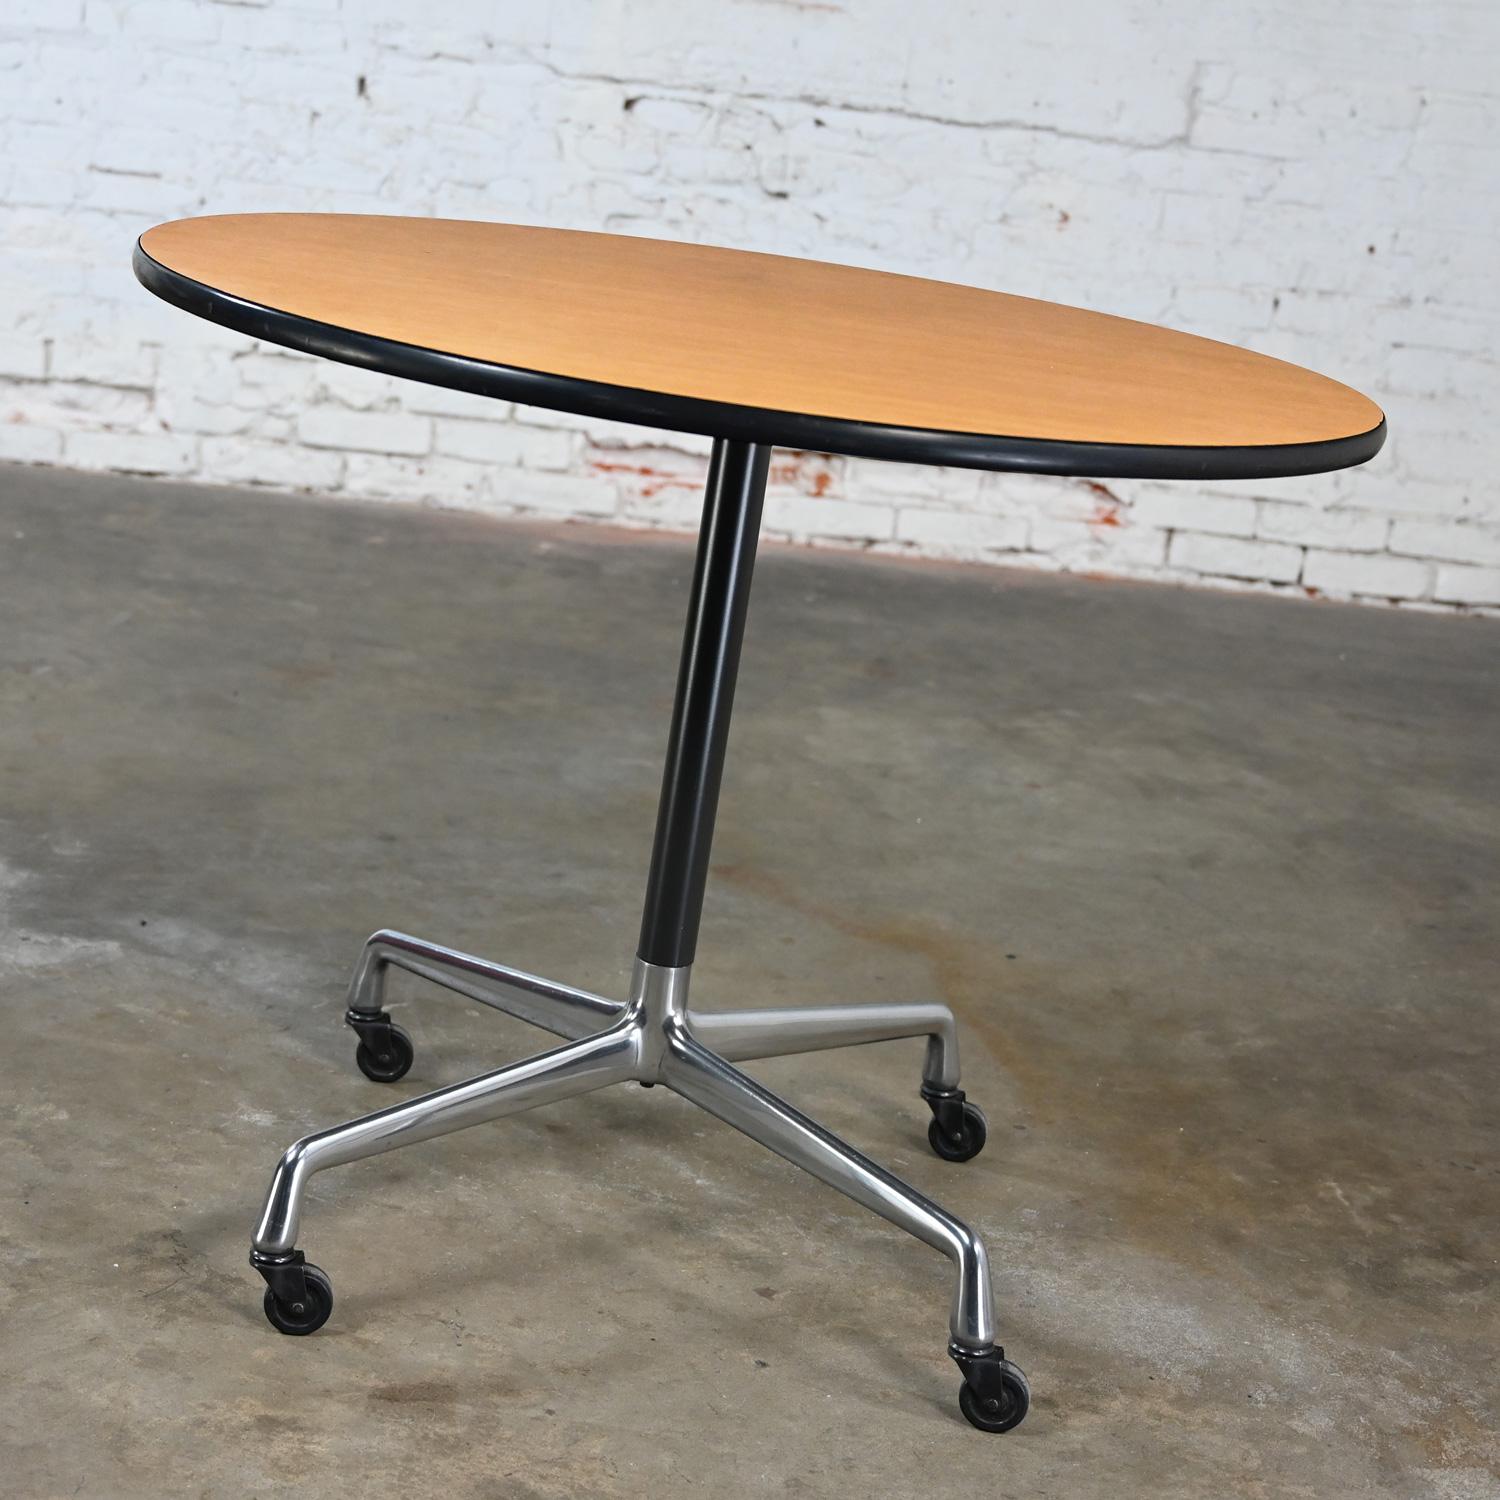 Eames Herman Miller Round Table Universal Base Casters & 36” Blonde Laminate Top For Sale 12